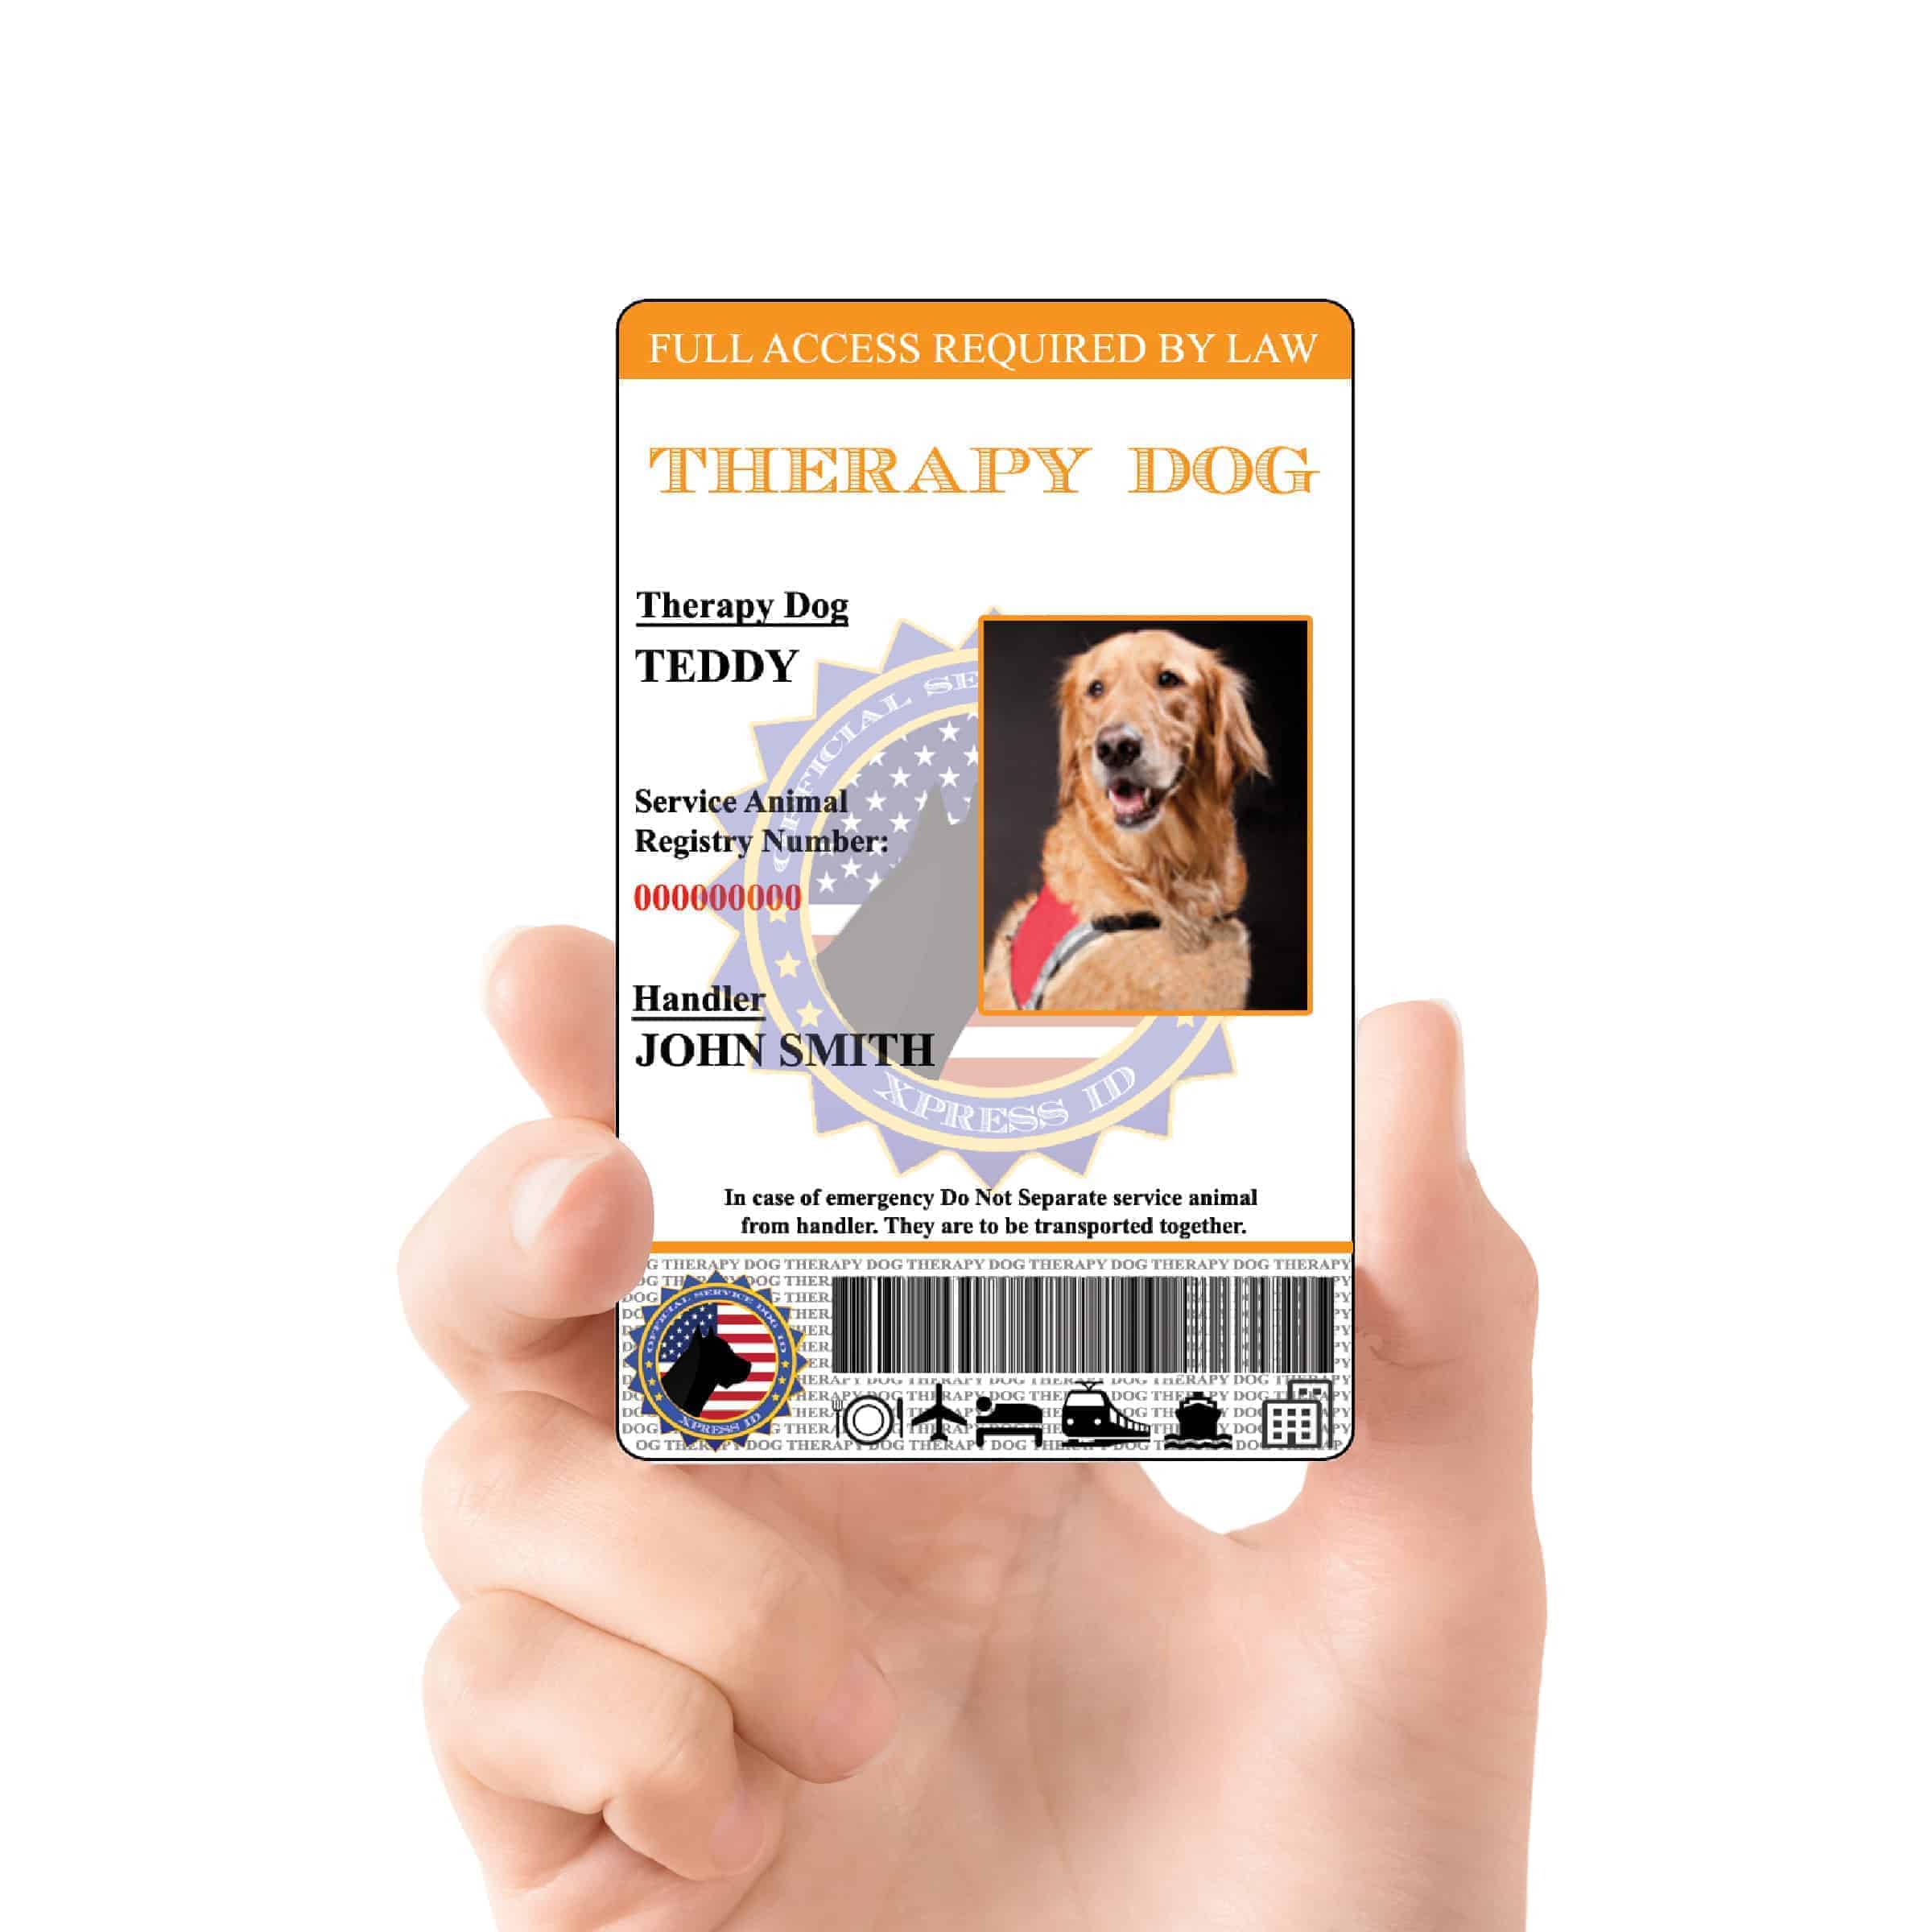 Therapy Dog ID Card | Free Access To Animal Registry | XpressID